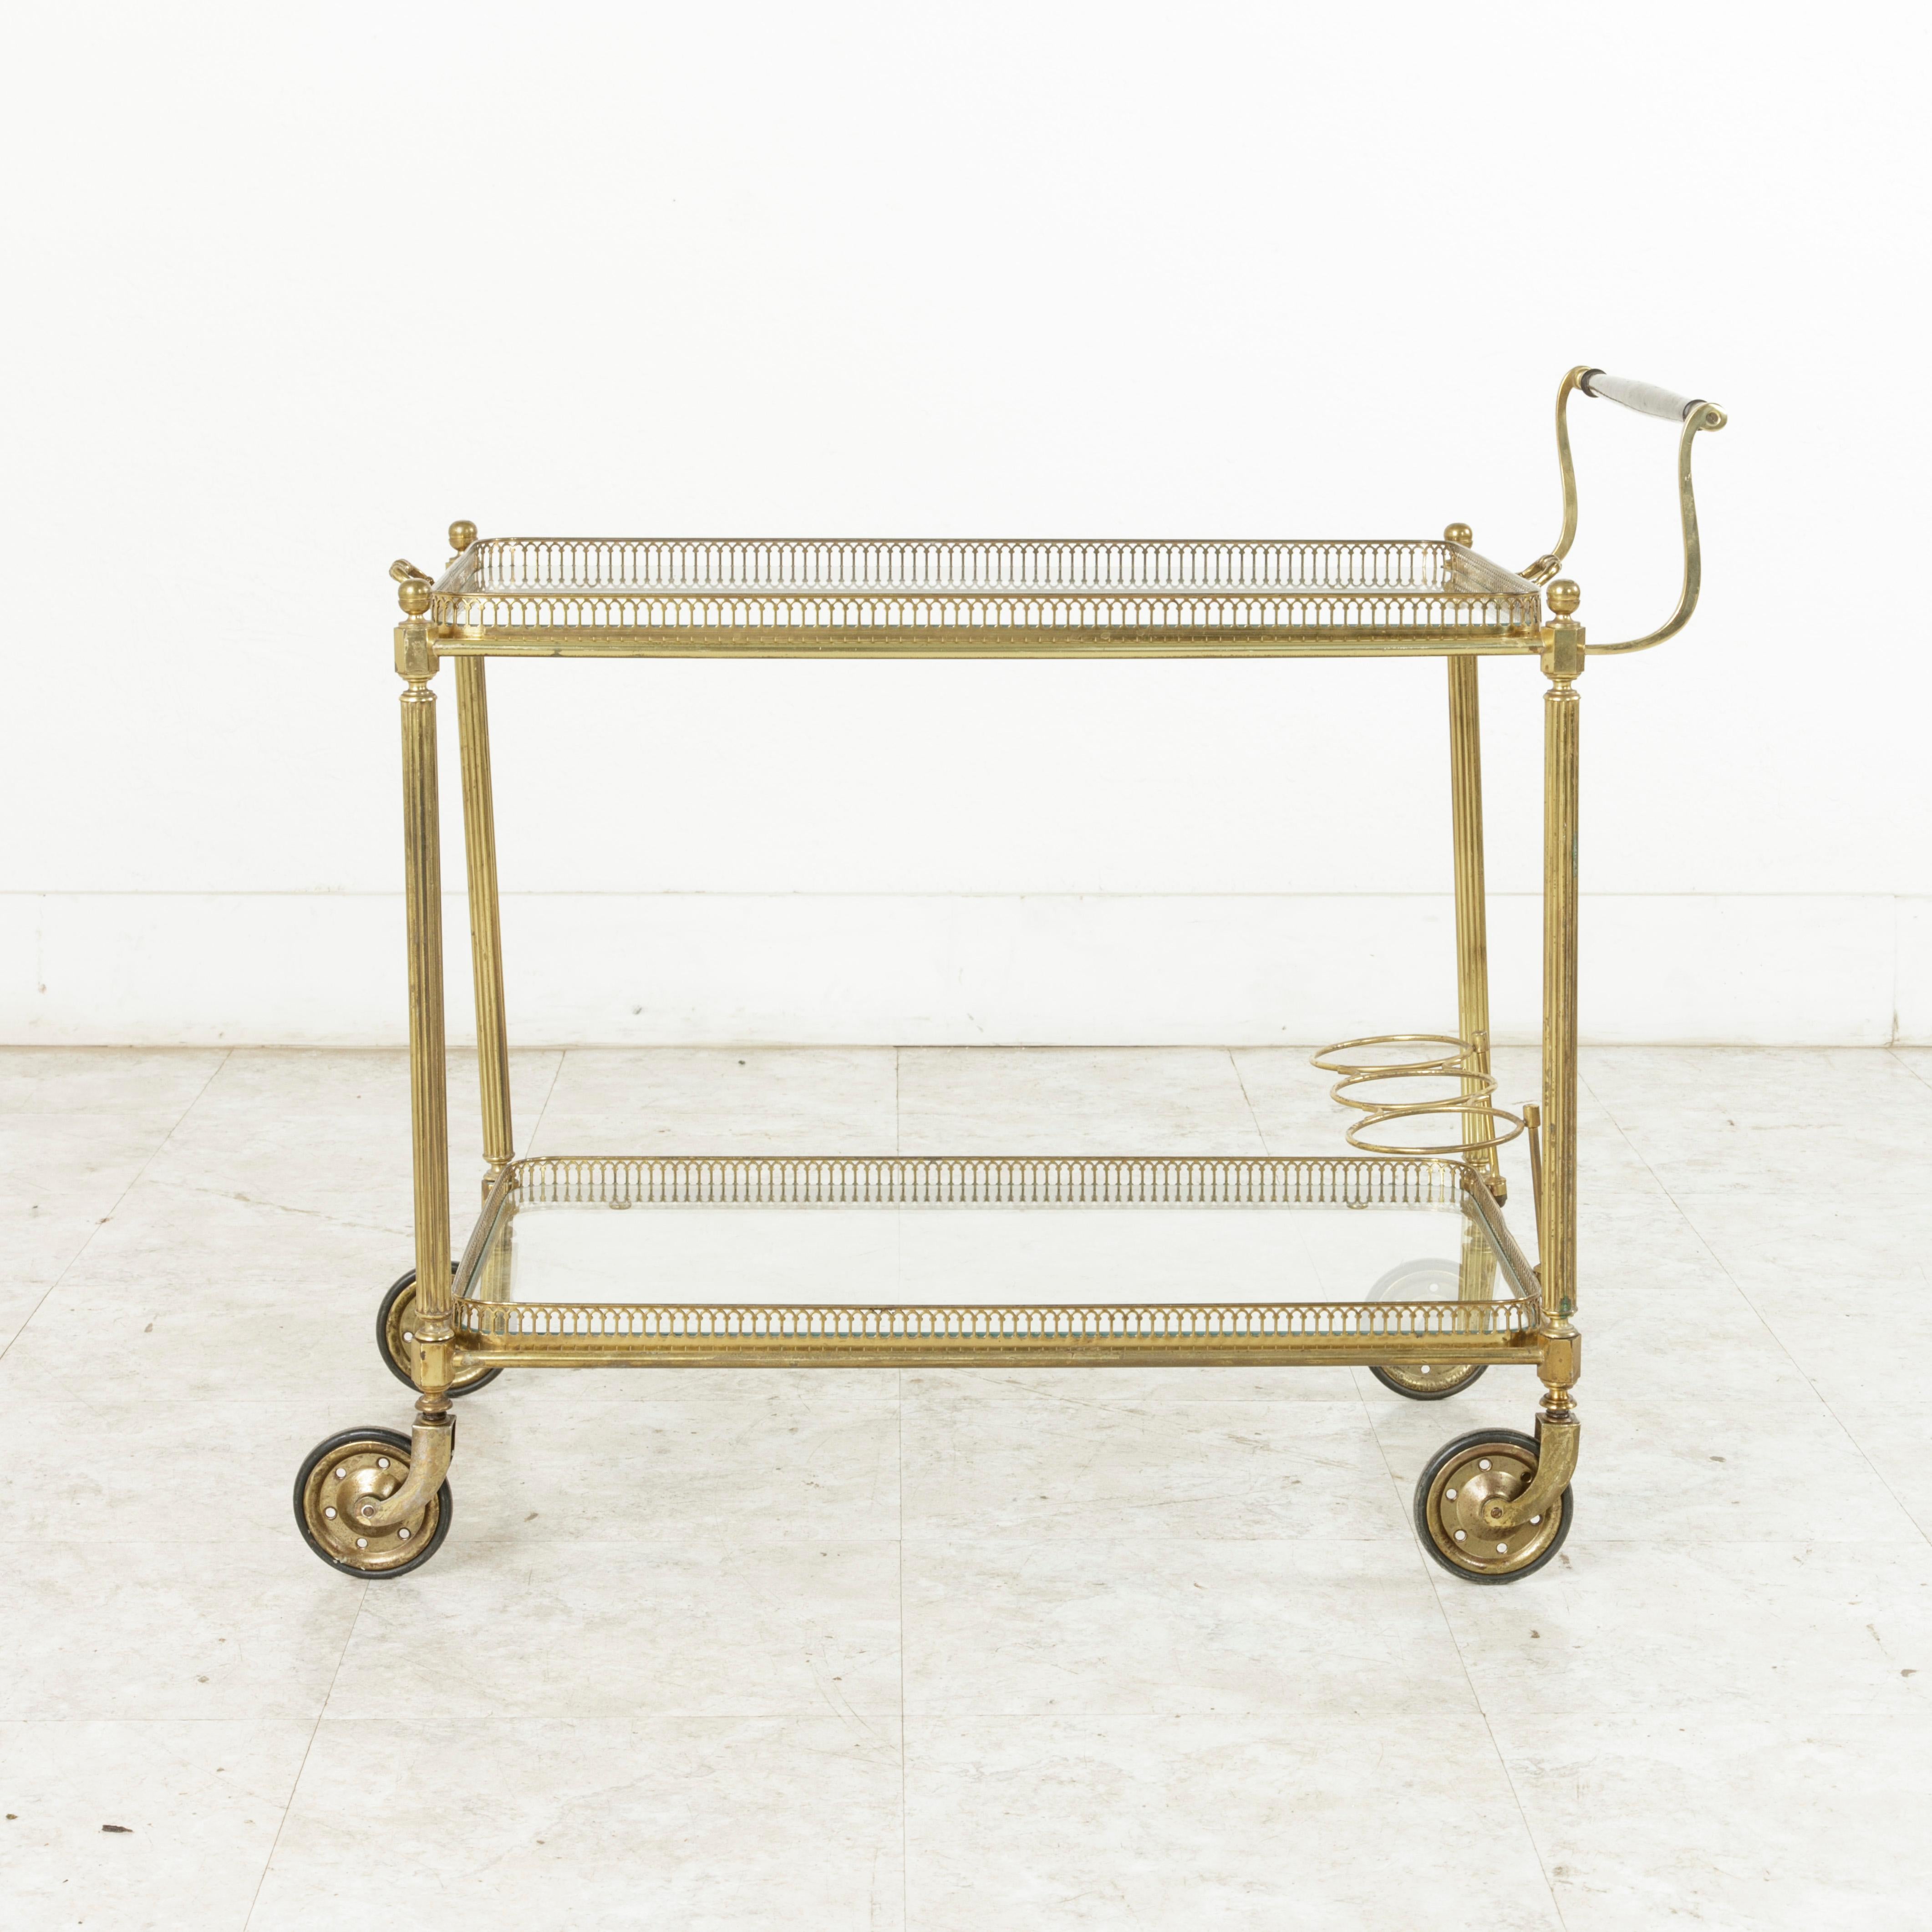 Midcentury French Brass Bar Cart with Mahogany Handle and Removable Tray (20. Jahrhundert)